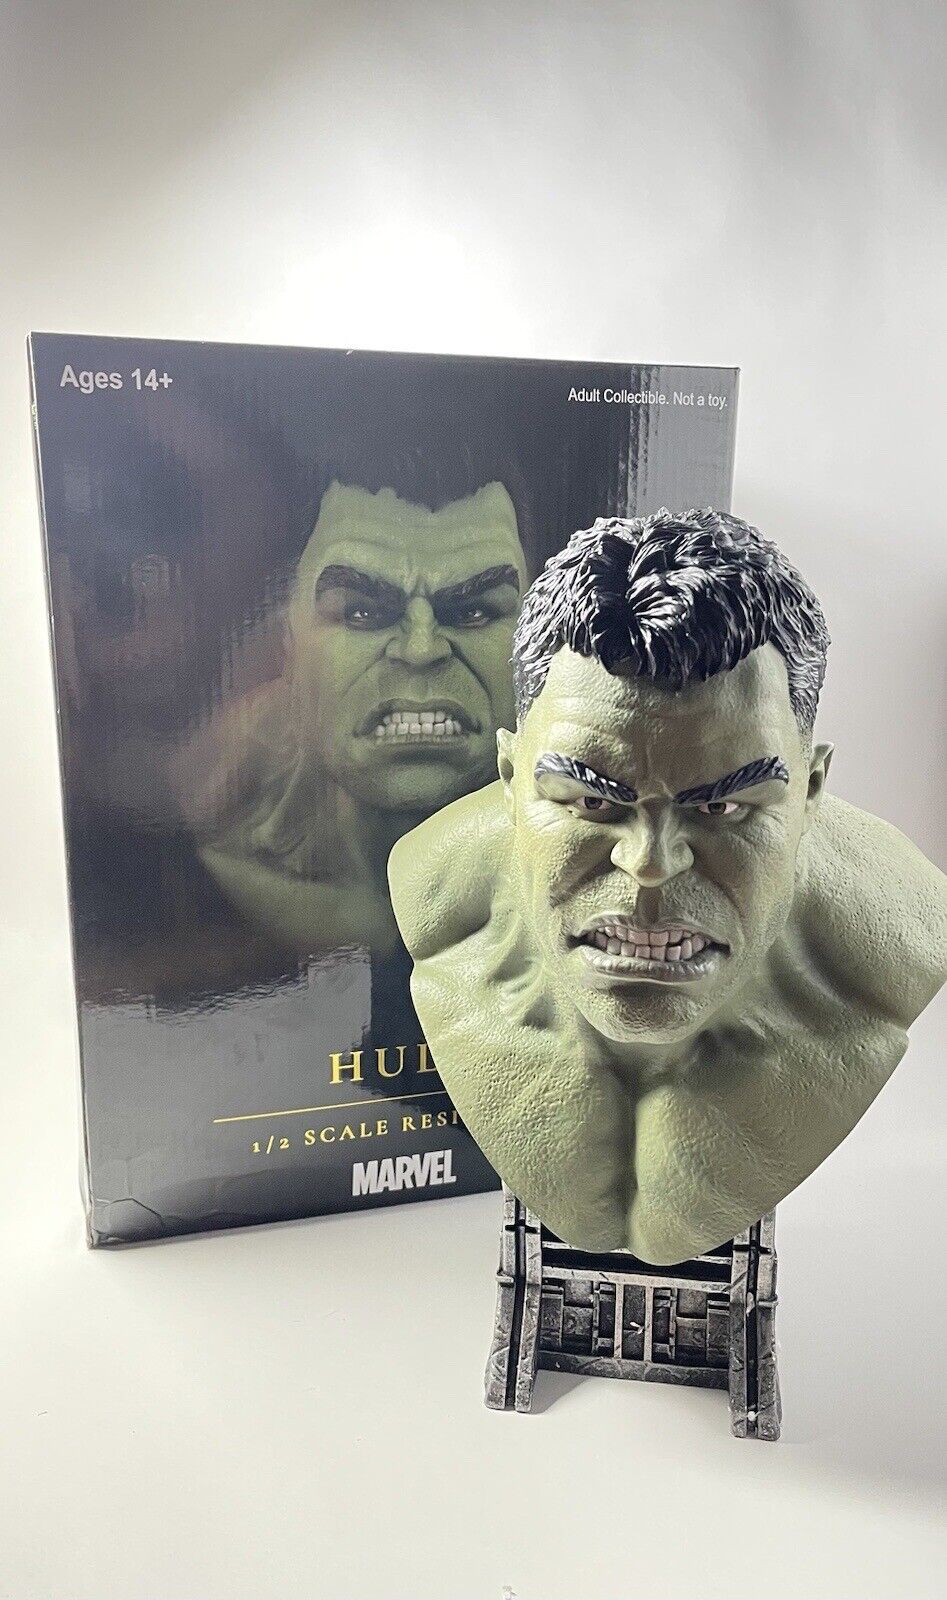 Limited Edition Hulk 1/2 Scale Resin Bust